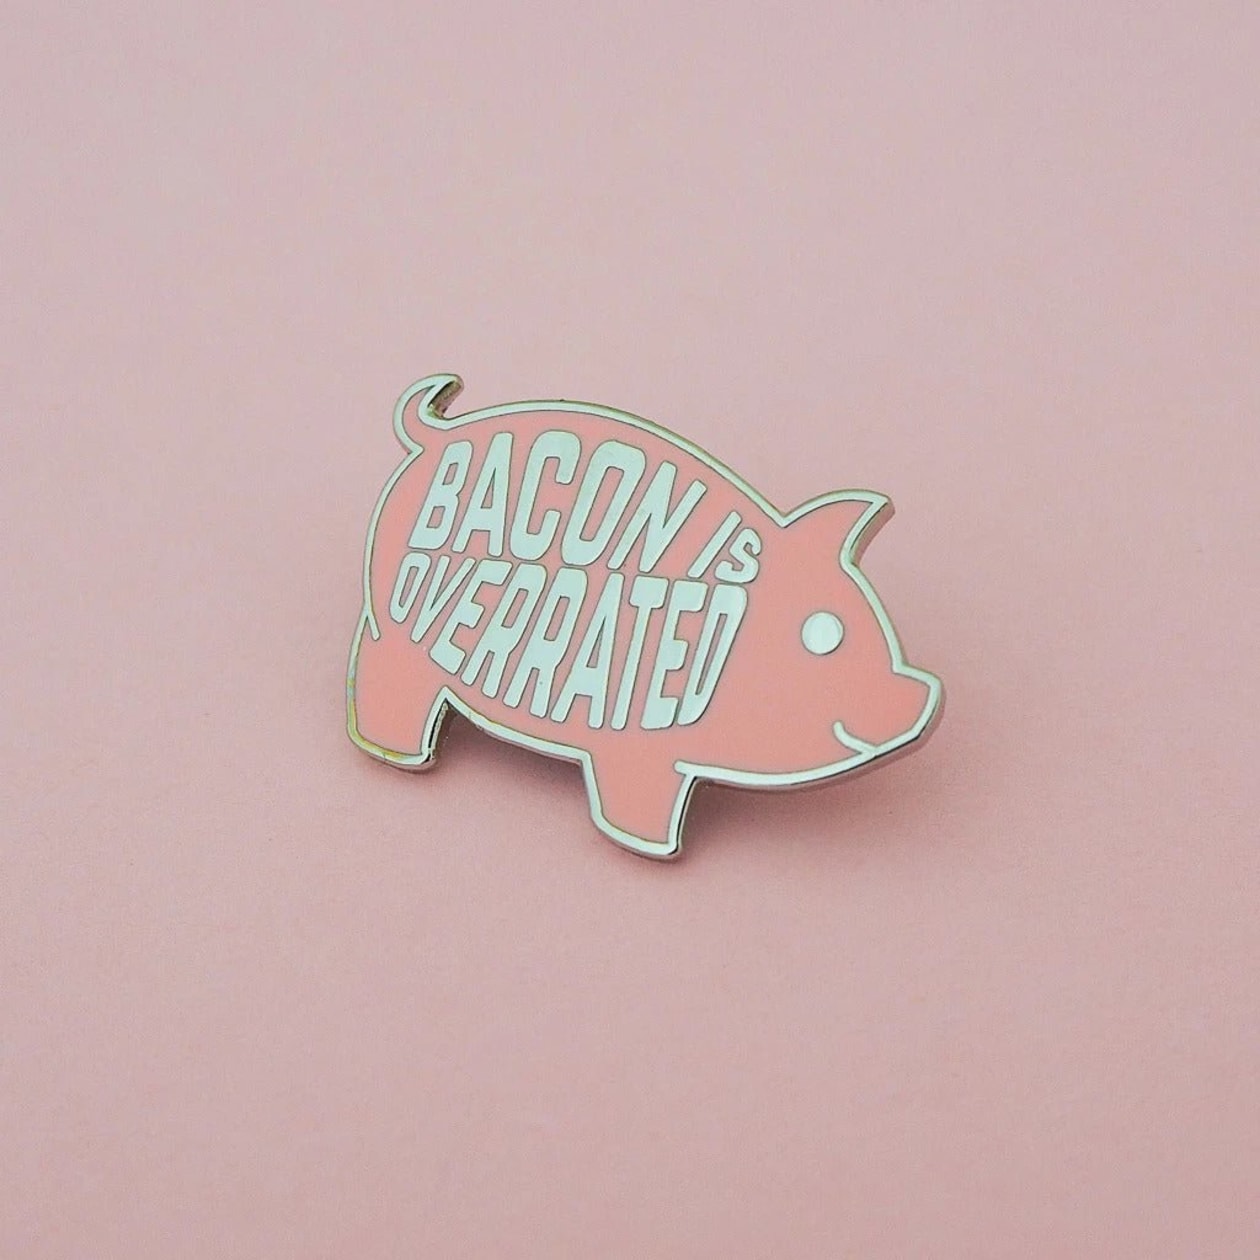 Bacon Is Overrated Enamel Pin With Pig Design